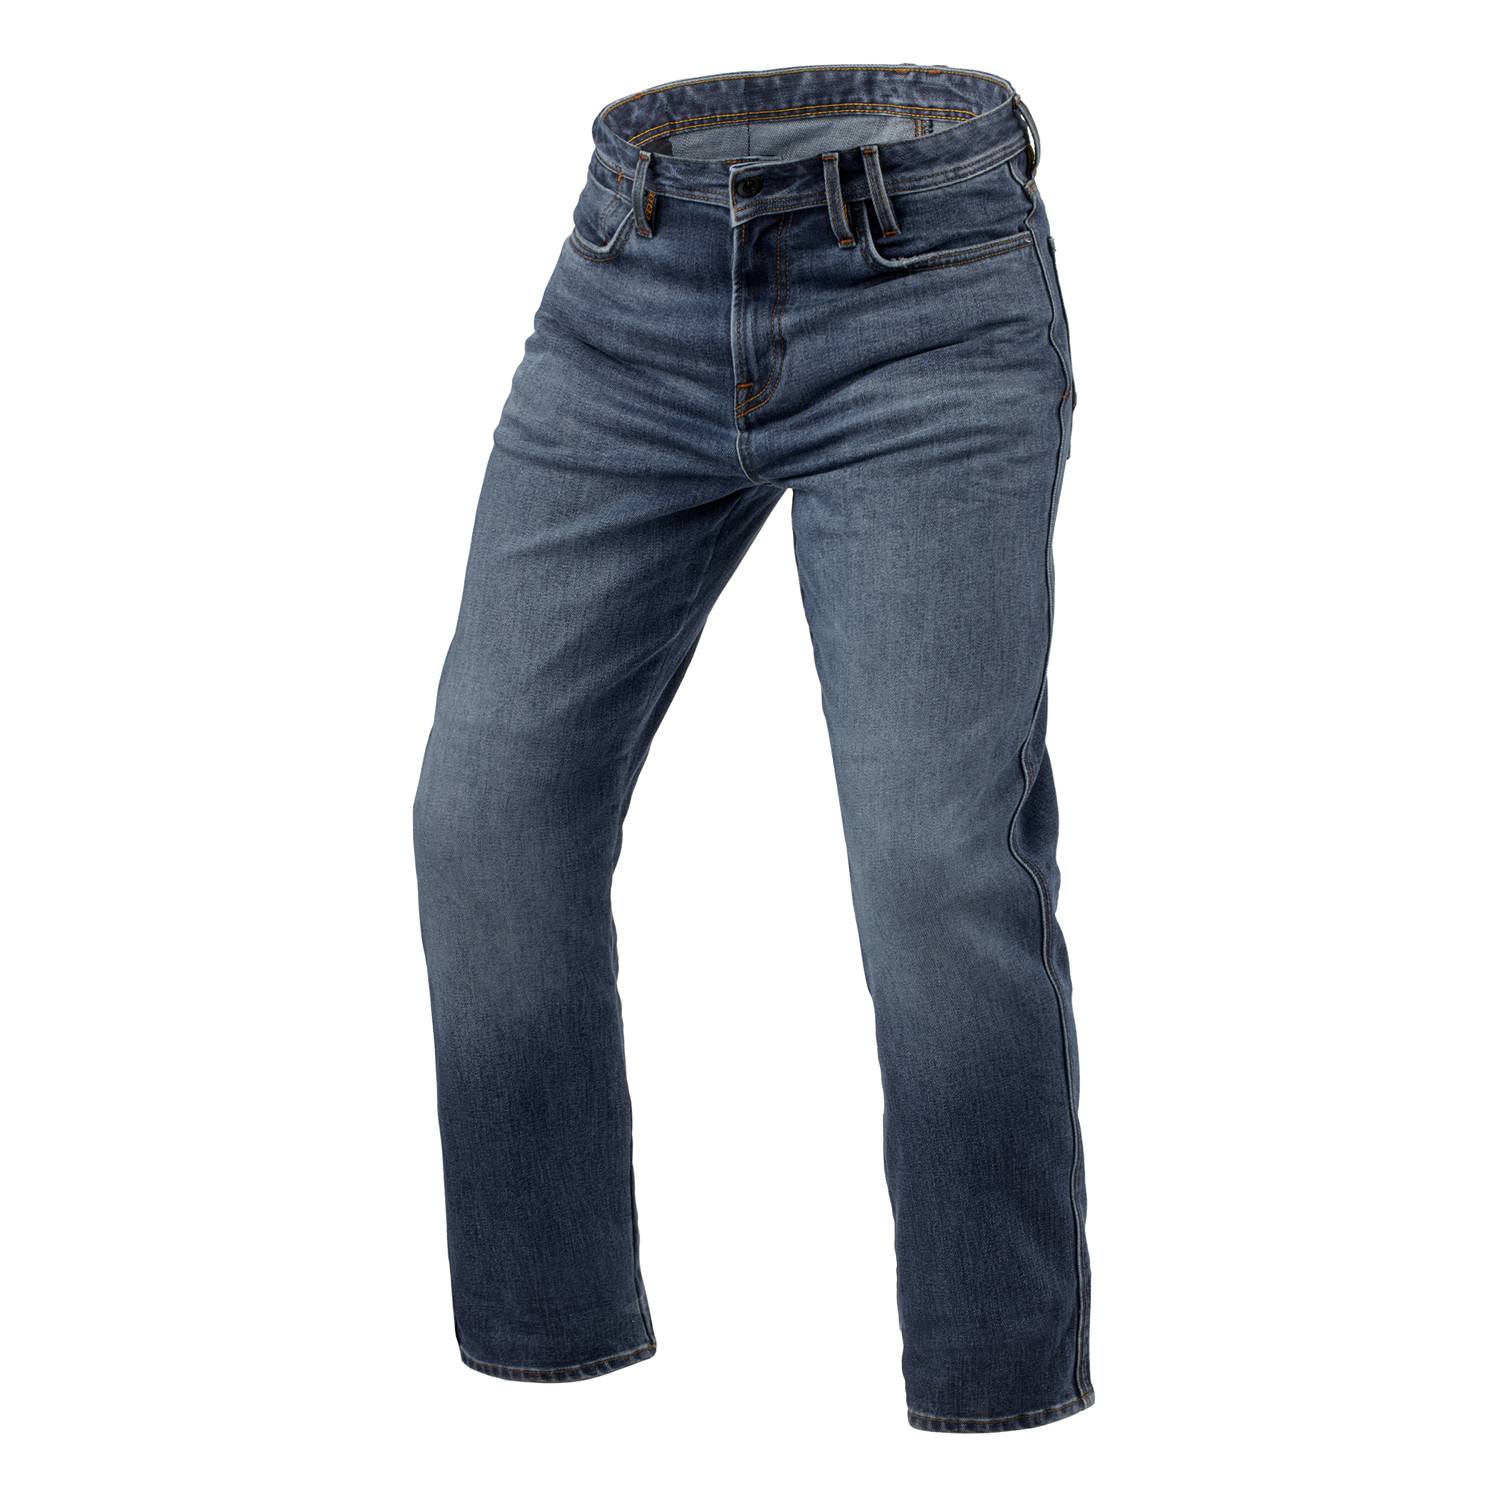 Image of REV'IT! Jeans Lombard 3 RF Medium Blue Stone L34 Motorcycle Jeans Size L34/W34 ID 8700001375986